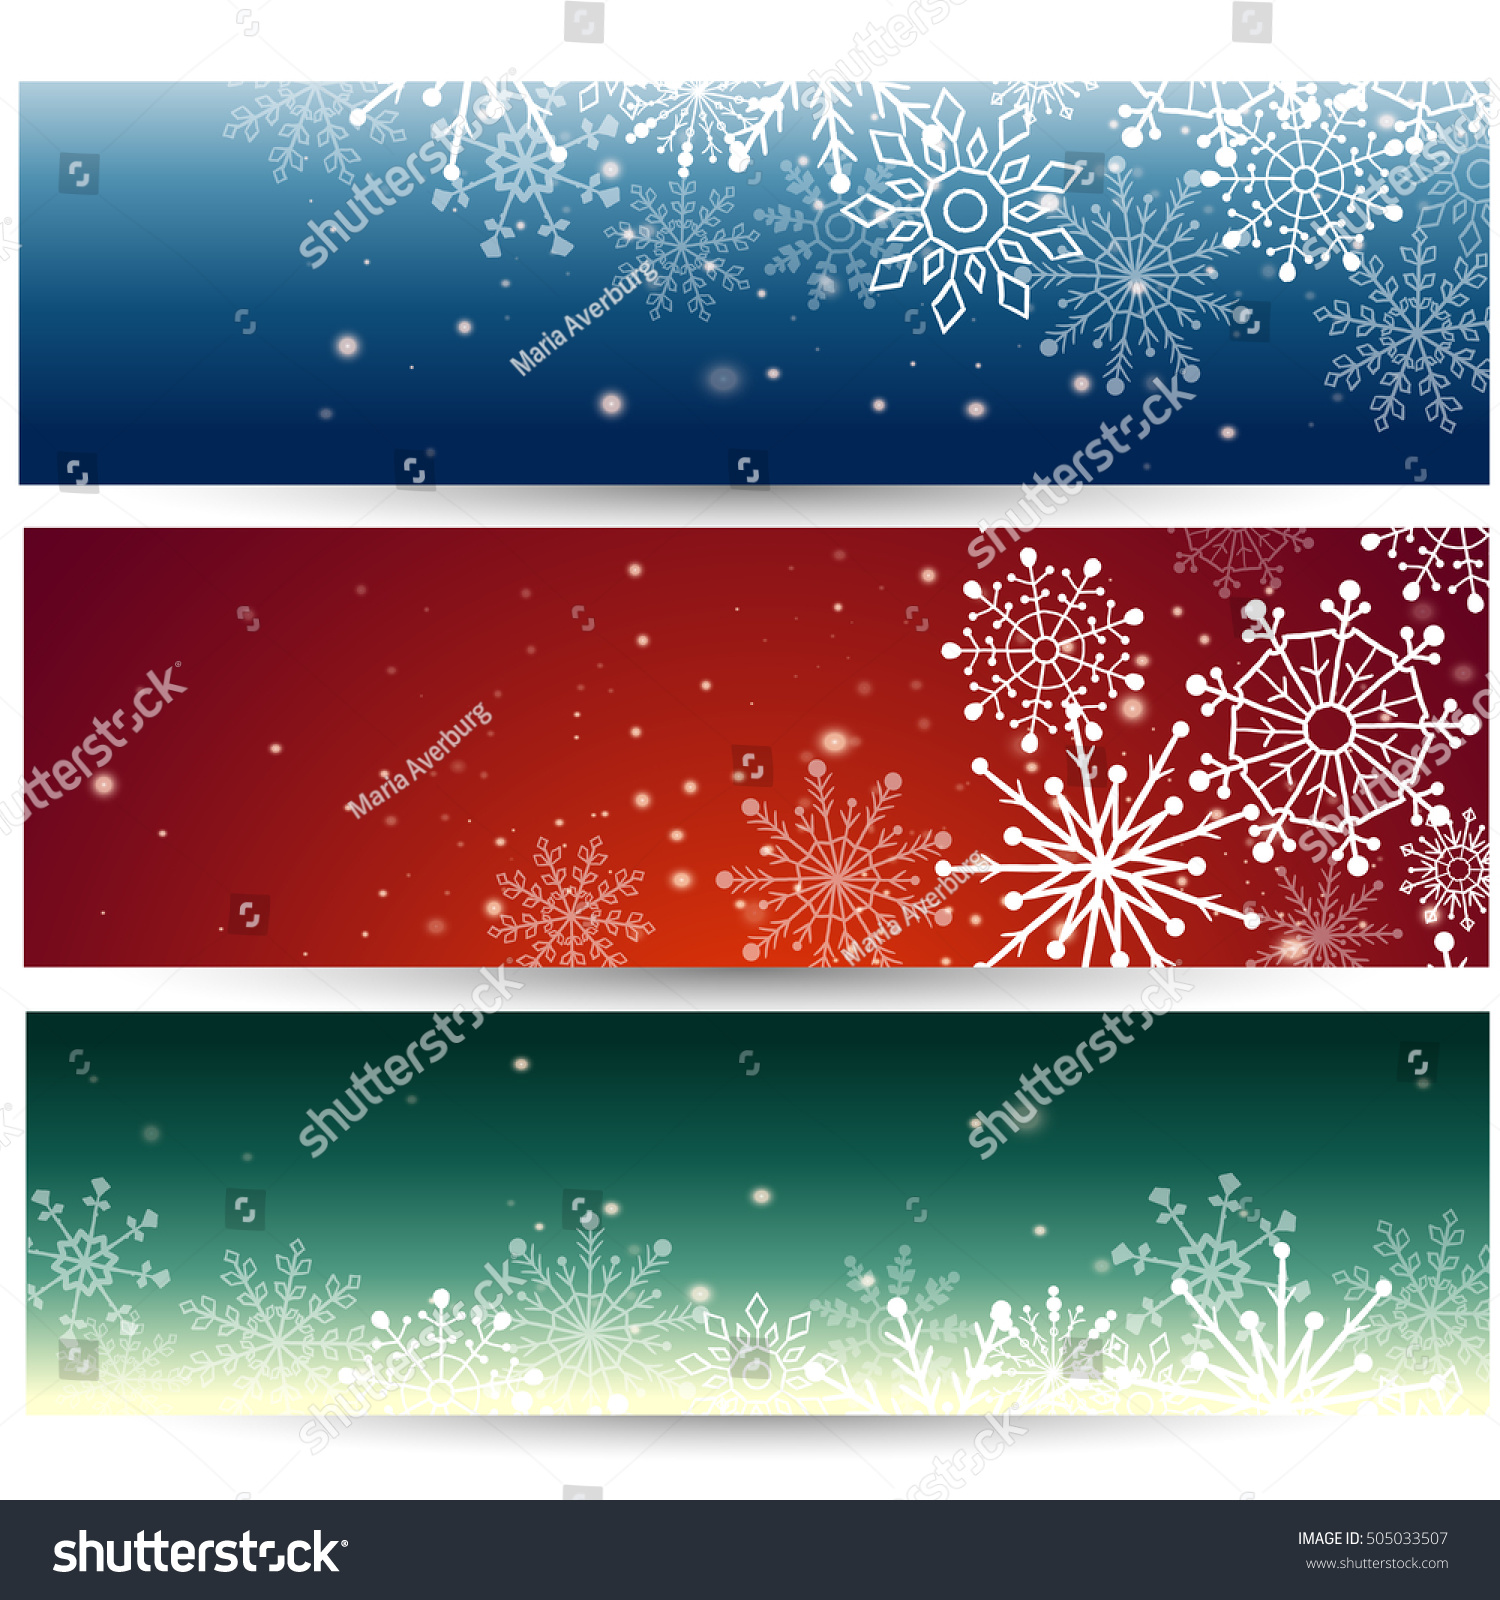 Set Of Web Banners With Snowflakes. Illustration - 505033507 : Shutterstock